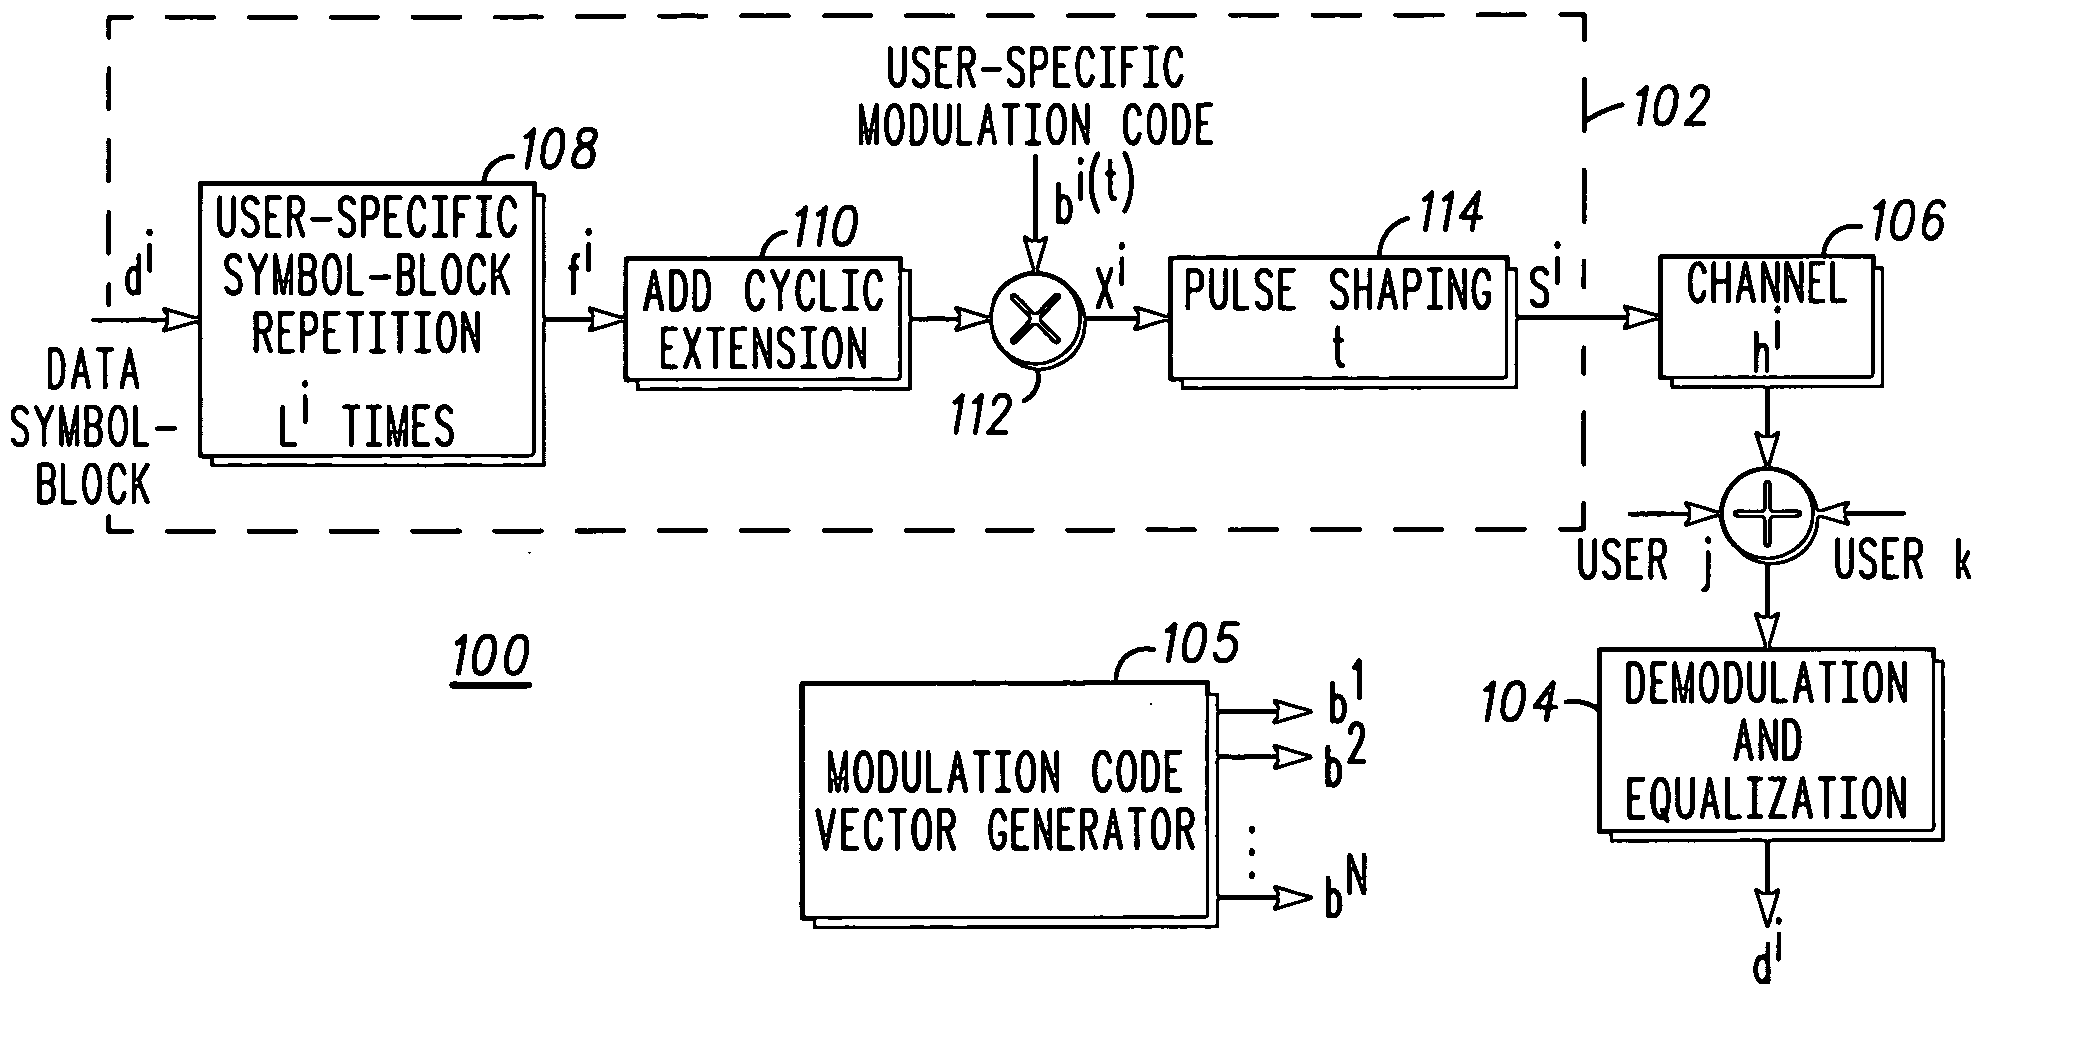 Frequency-hopped IFDMA communication system